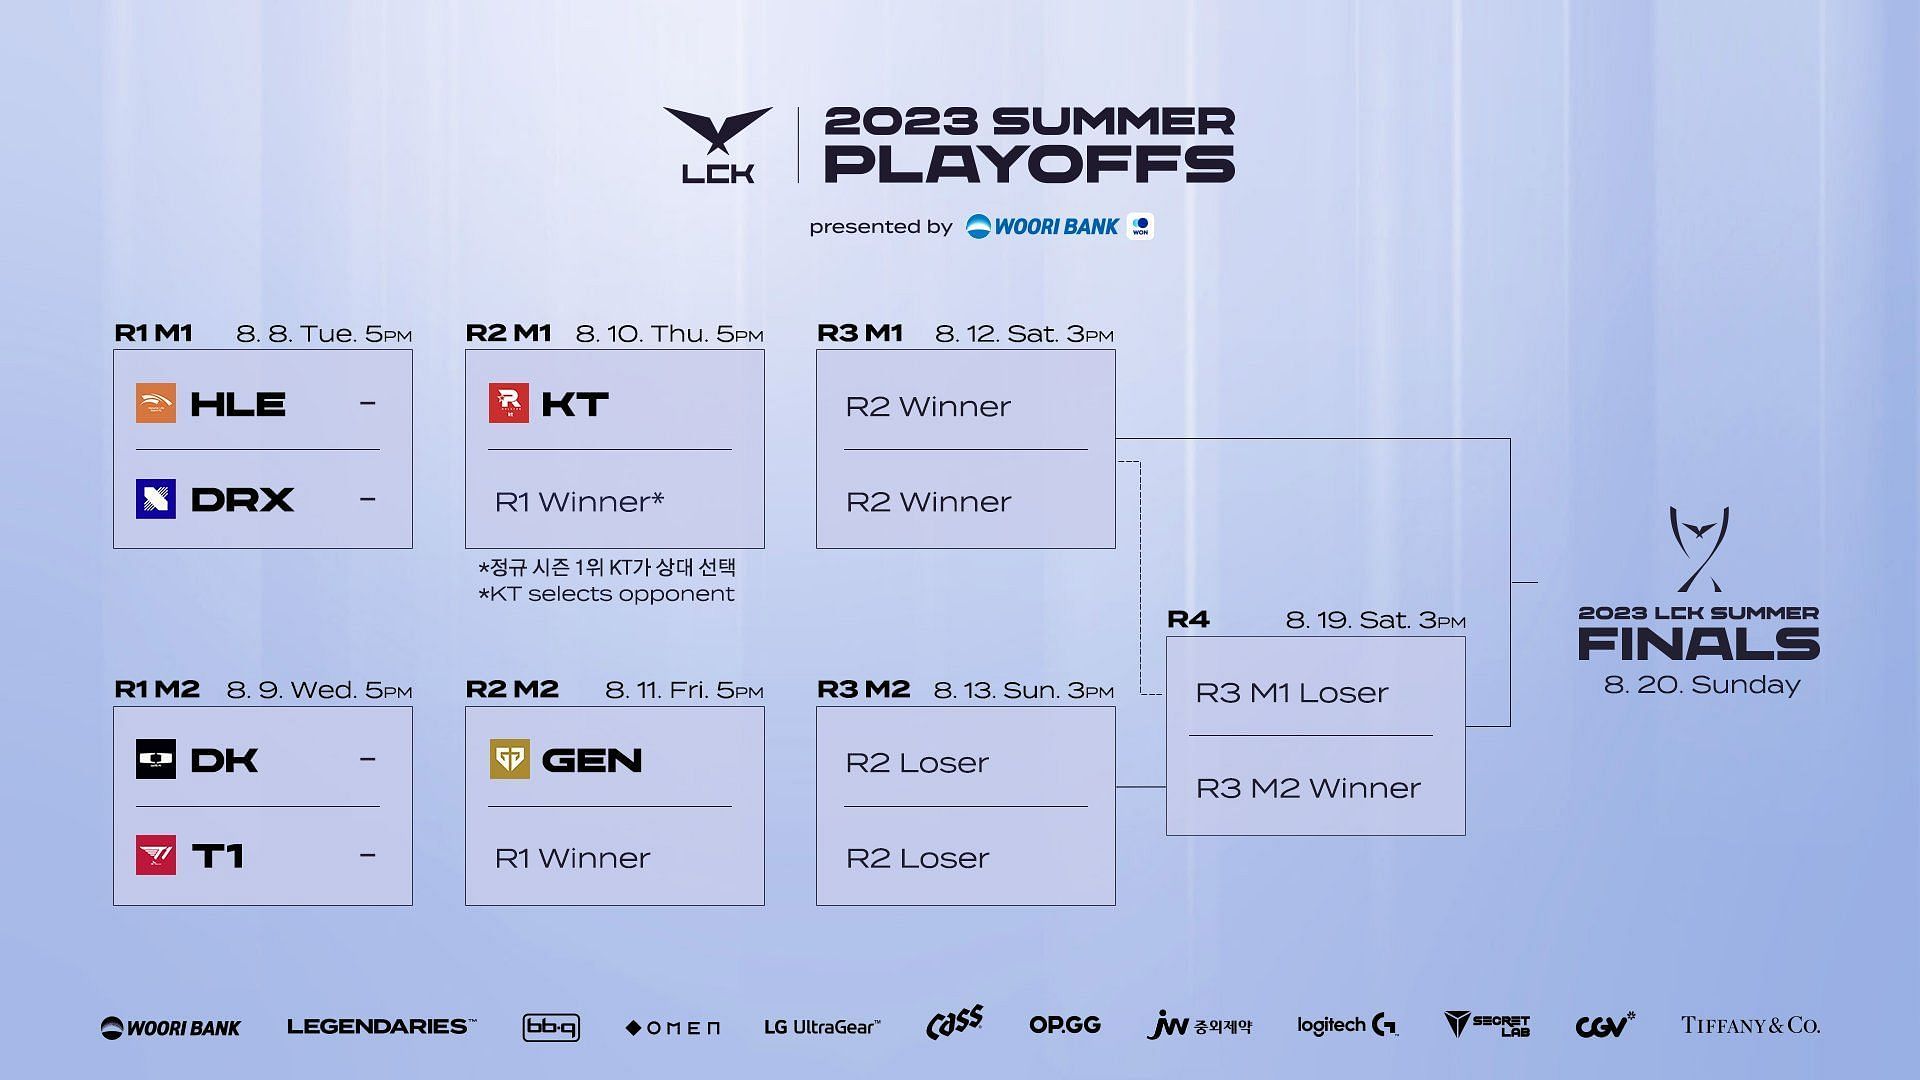 League of Legends: League of Legends LCK 2023 Summer Playoffs: Qualified teams, schedule, and more